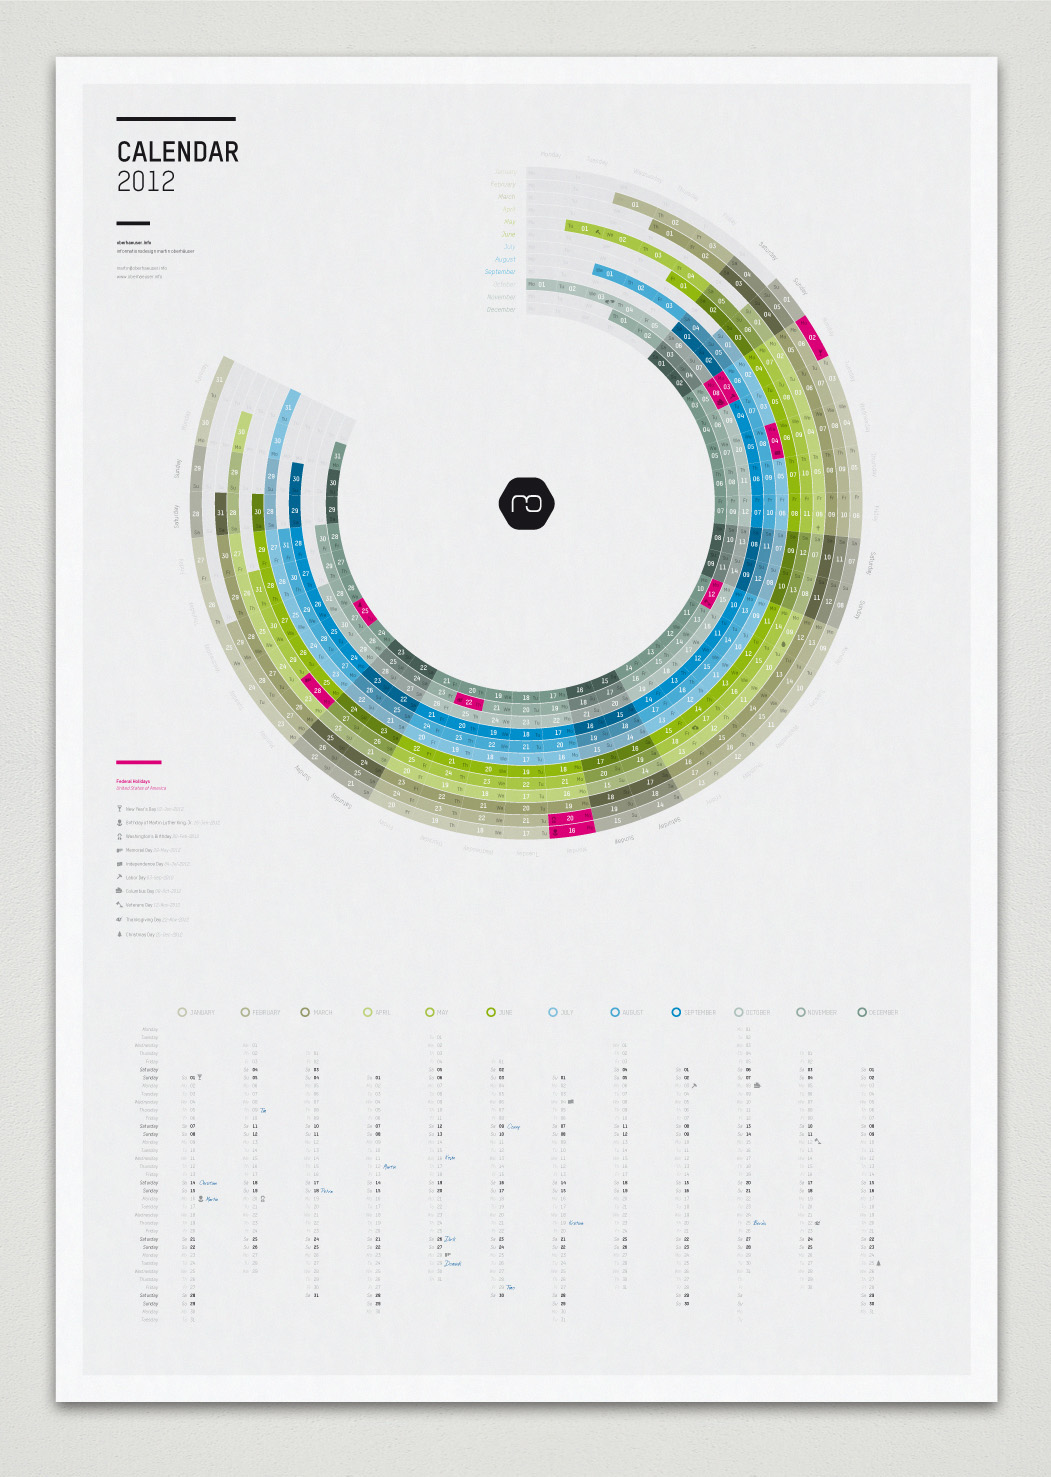 calendar infographic informationgraphics Day month year 2012